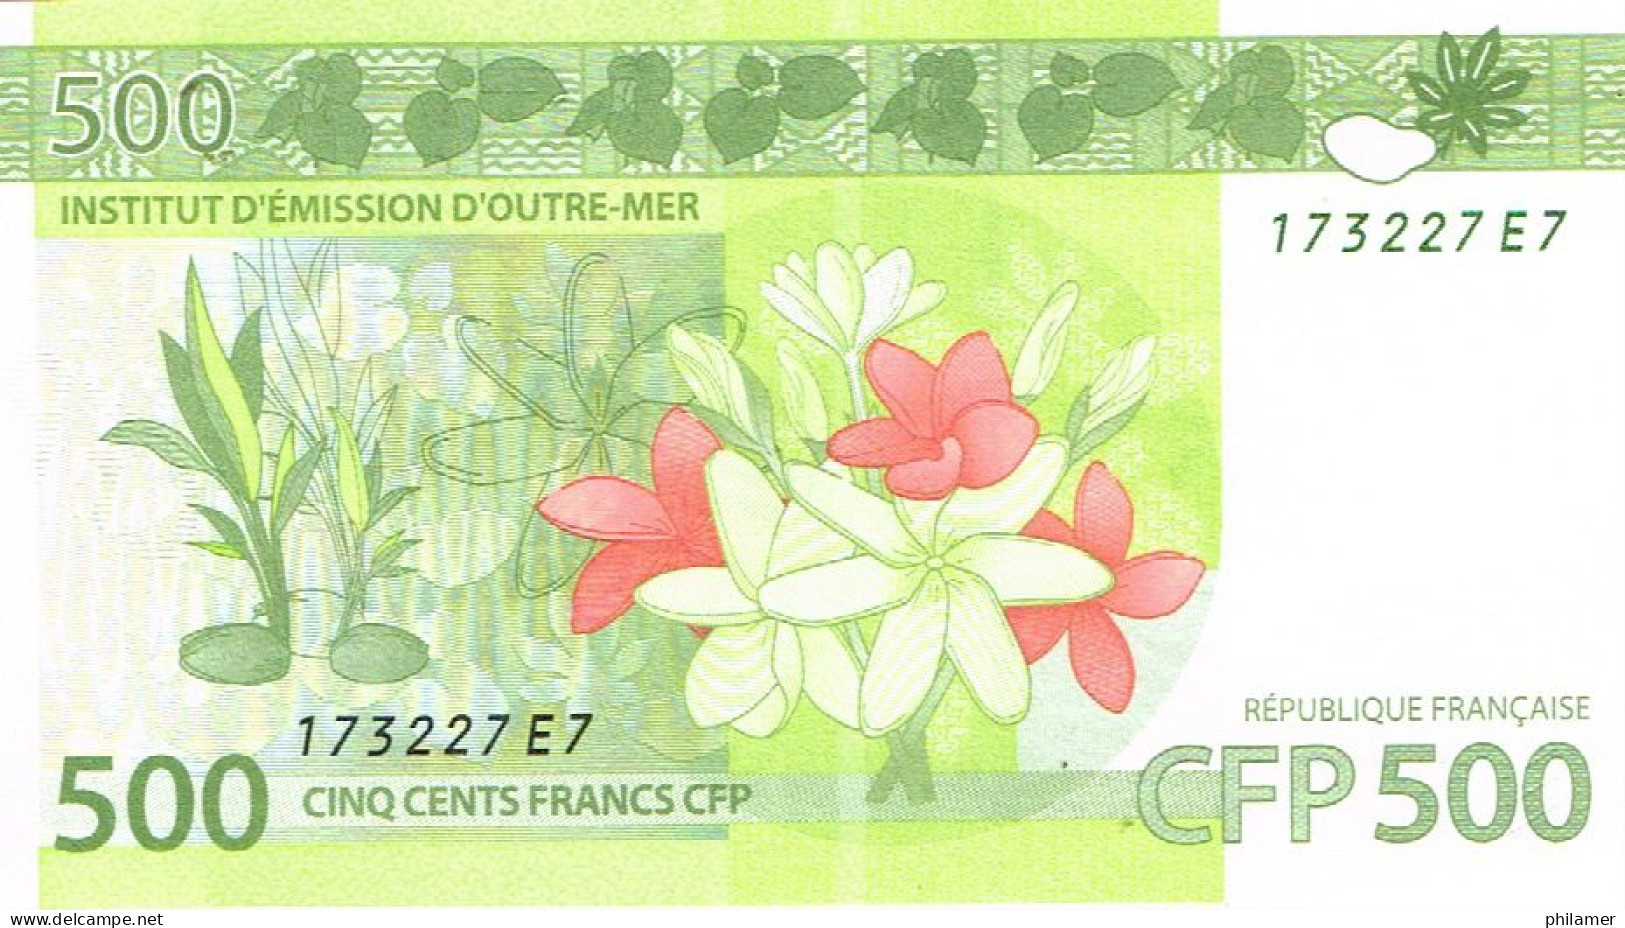 E7 Nouvelle Caledonie Caledonia Billet Banque Monnaie Banknote IEOM 500 F Taro Hibiscus Coco Coconut Mint UNC - French Pacific Territories (1992-...)